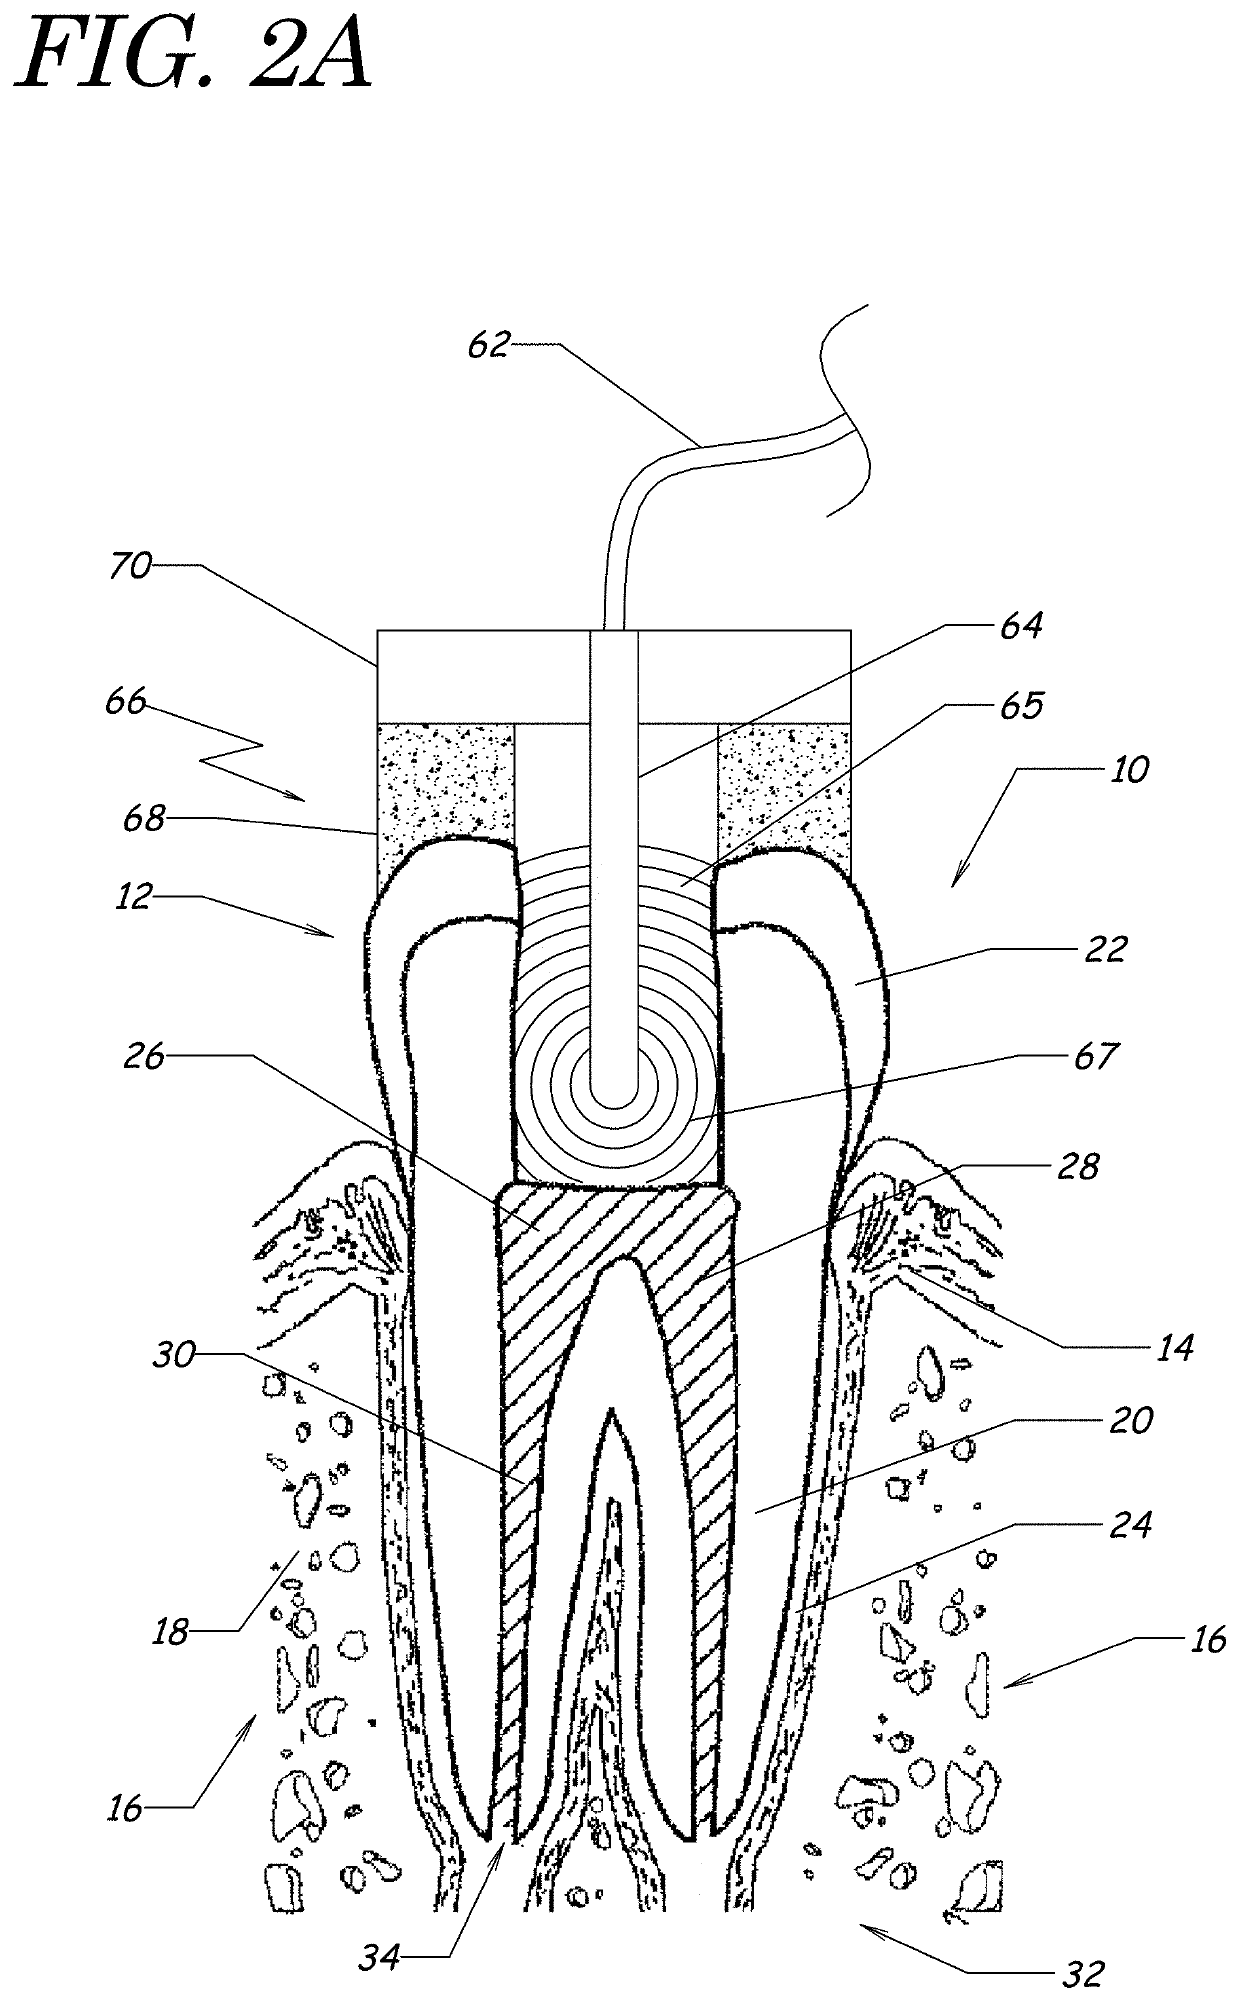 Apparatus, methods, and compositions for endodontic treatments